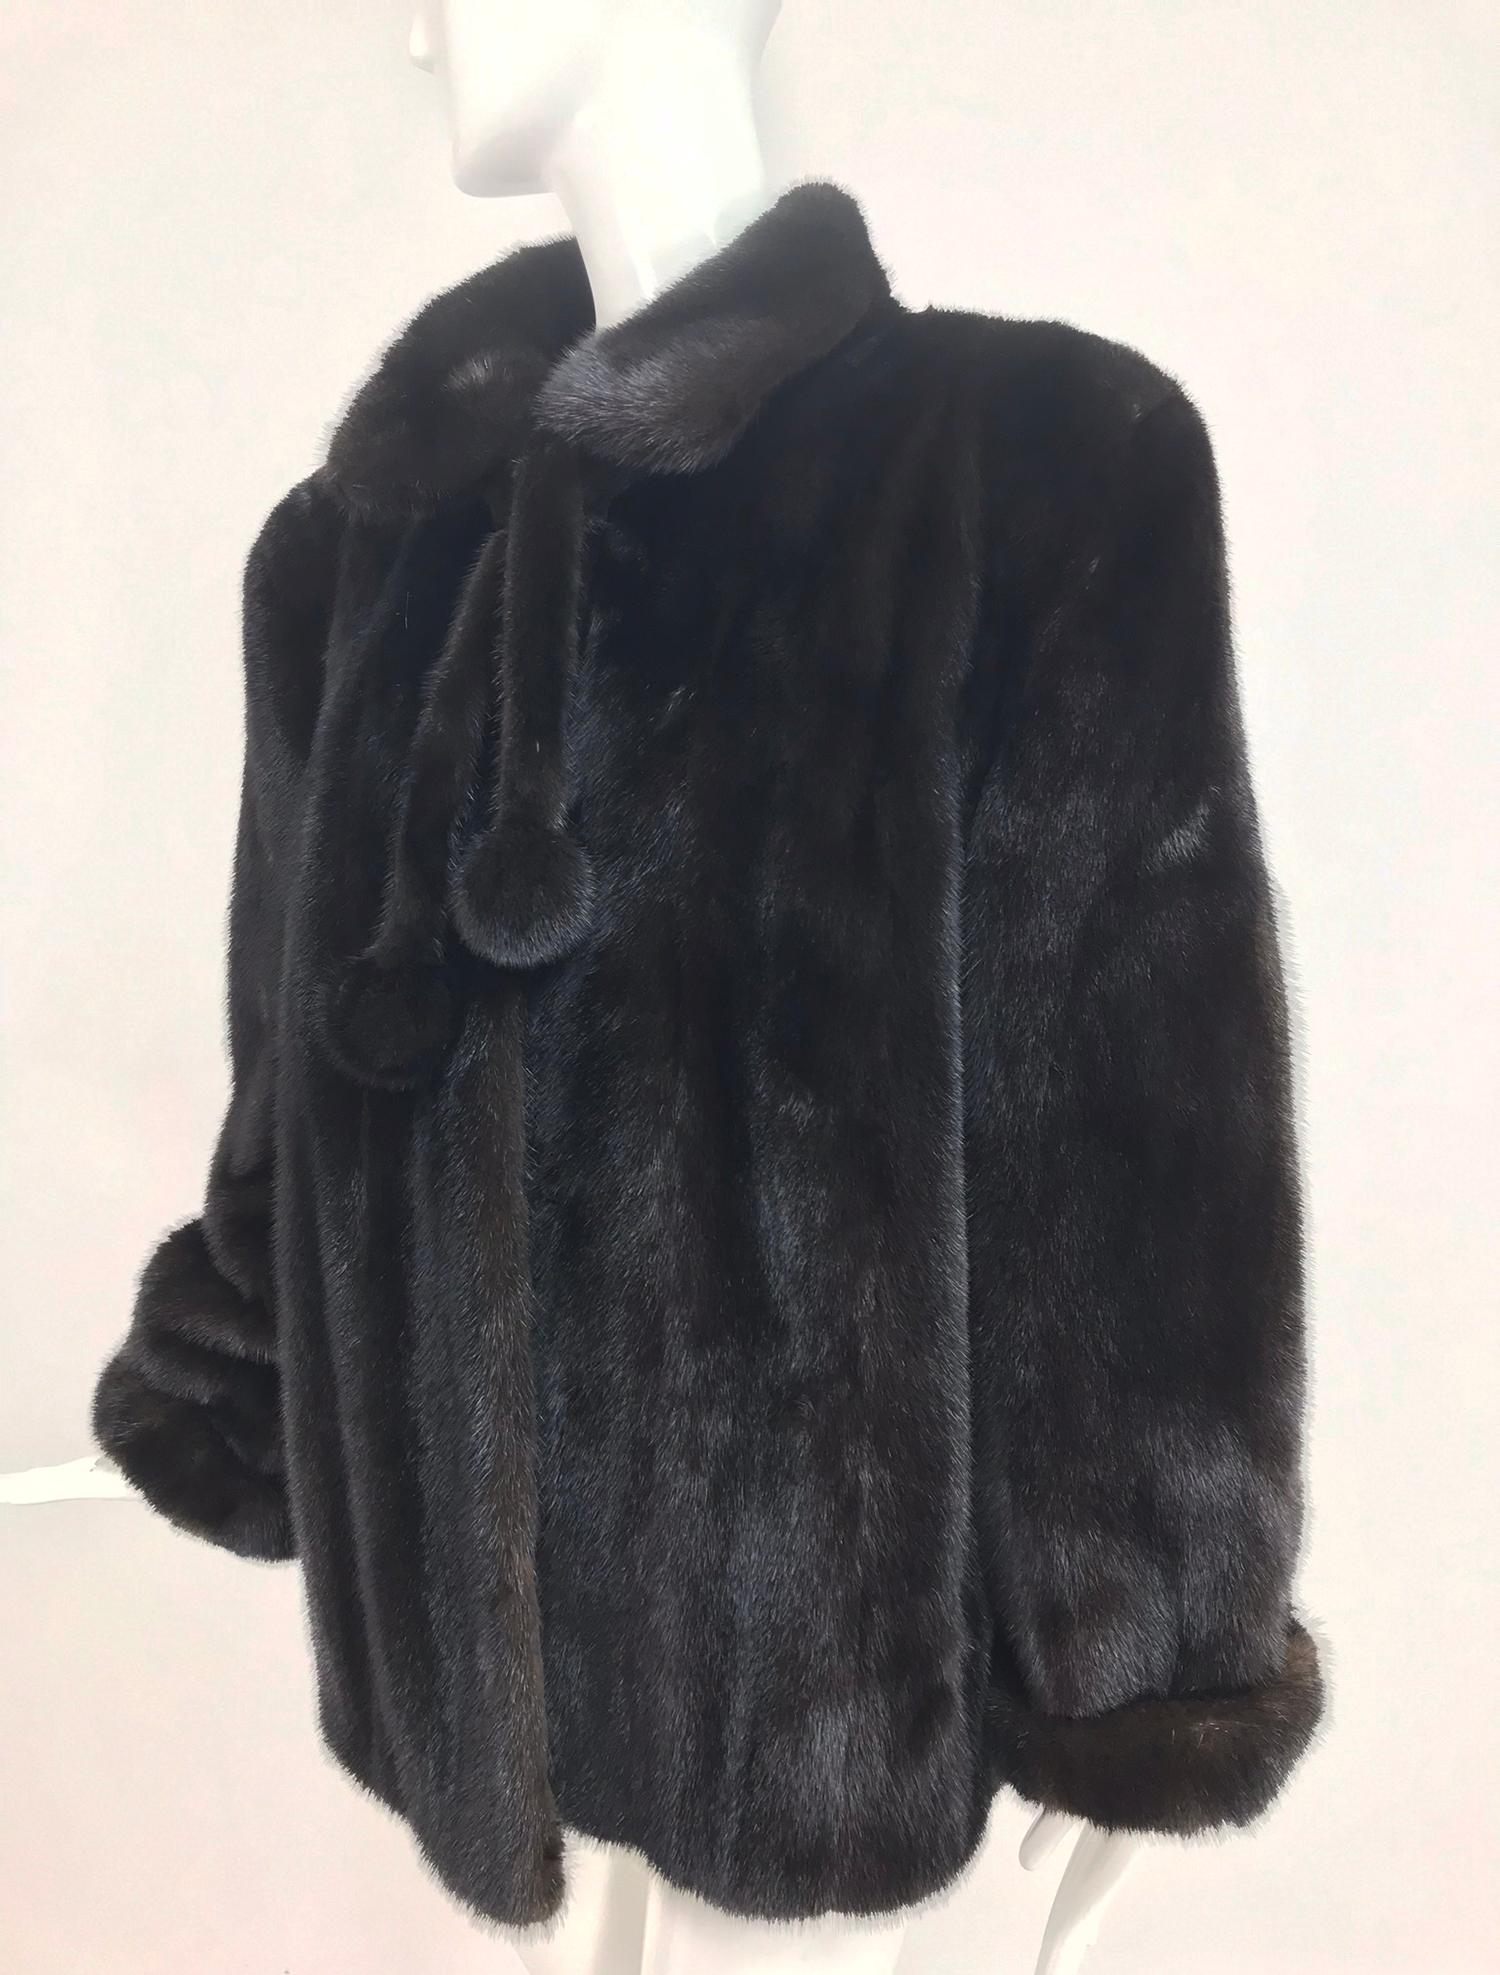 Nieman Marcus black mink fur jacket with pom pom ties from Nieman Marcus. This gorgeous jacket is in excellent condition, dark glossy fur is supple with no issues. The jacket has long sleeves that are slightly full with 2 inch turn back cuffs. Round